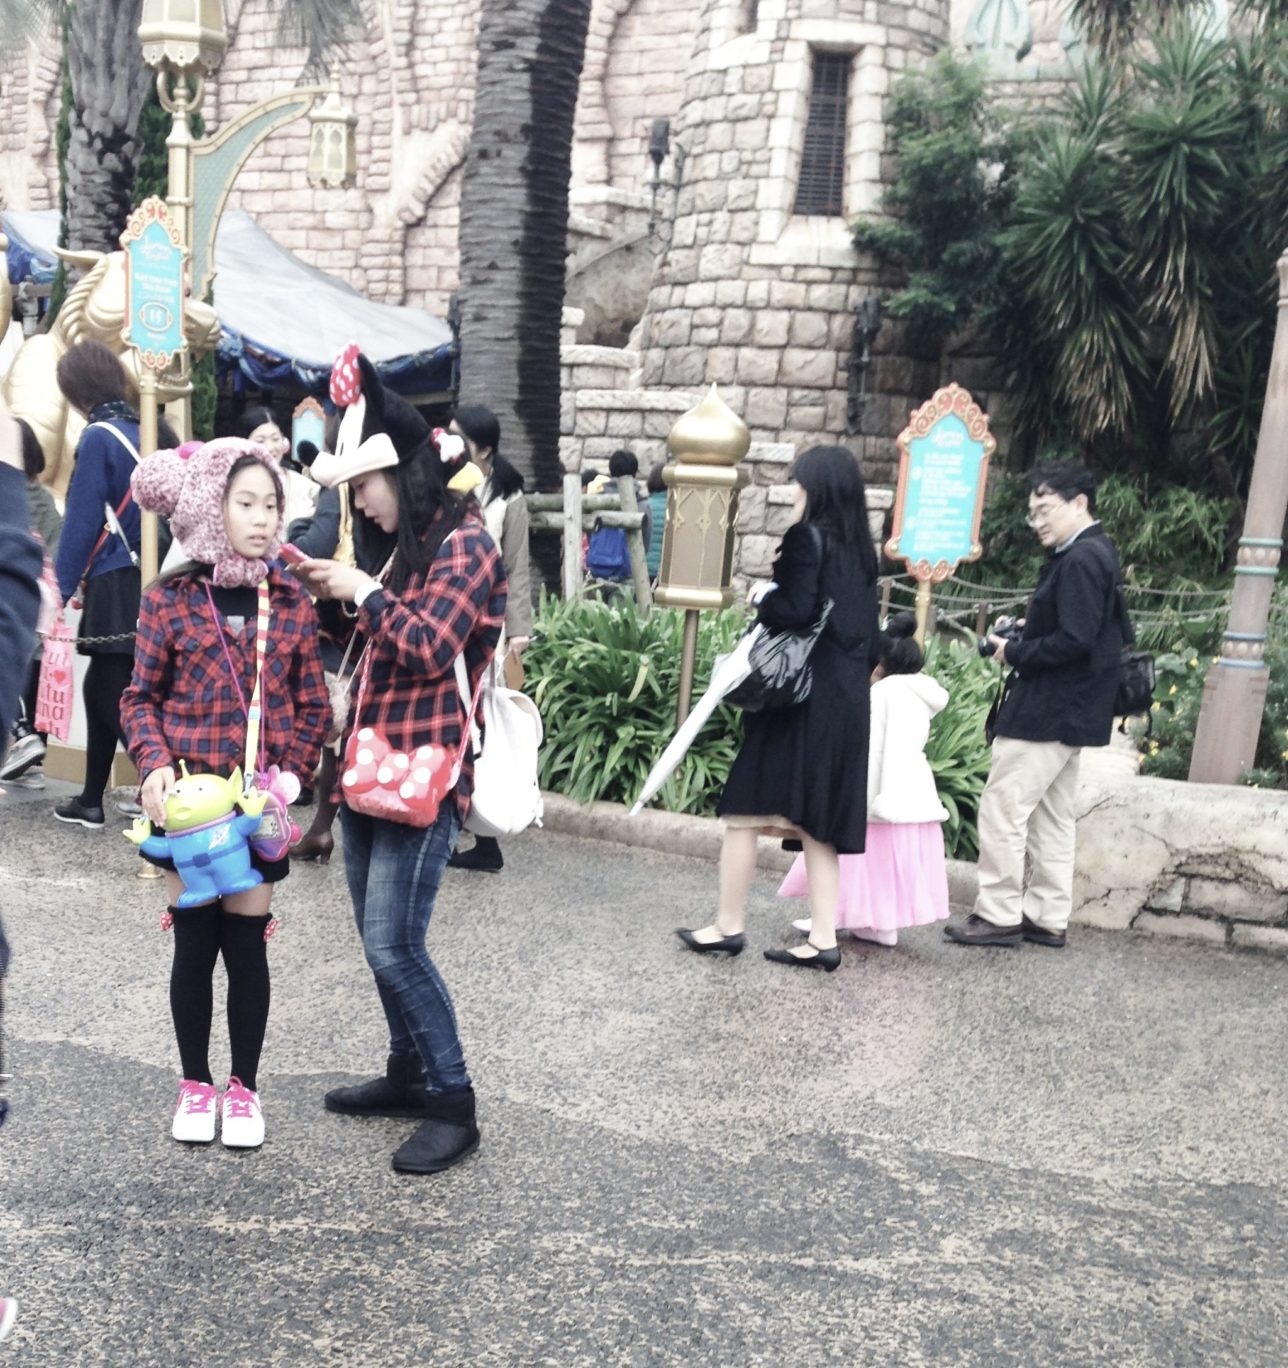 Kawaii Tokyo Disney Sea Tokyo Disney Sea Tokyo Disneyland Matching Outfits Tokyo, Japan Cute 14